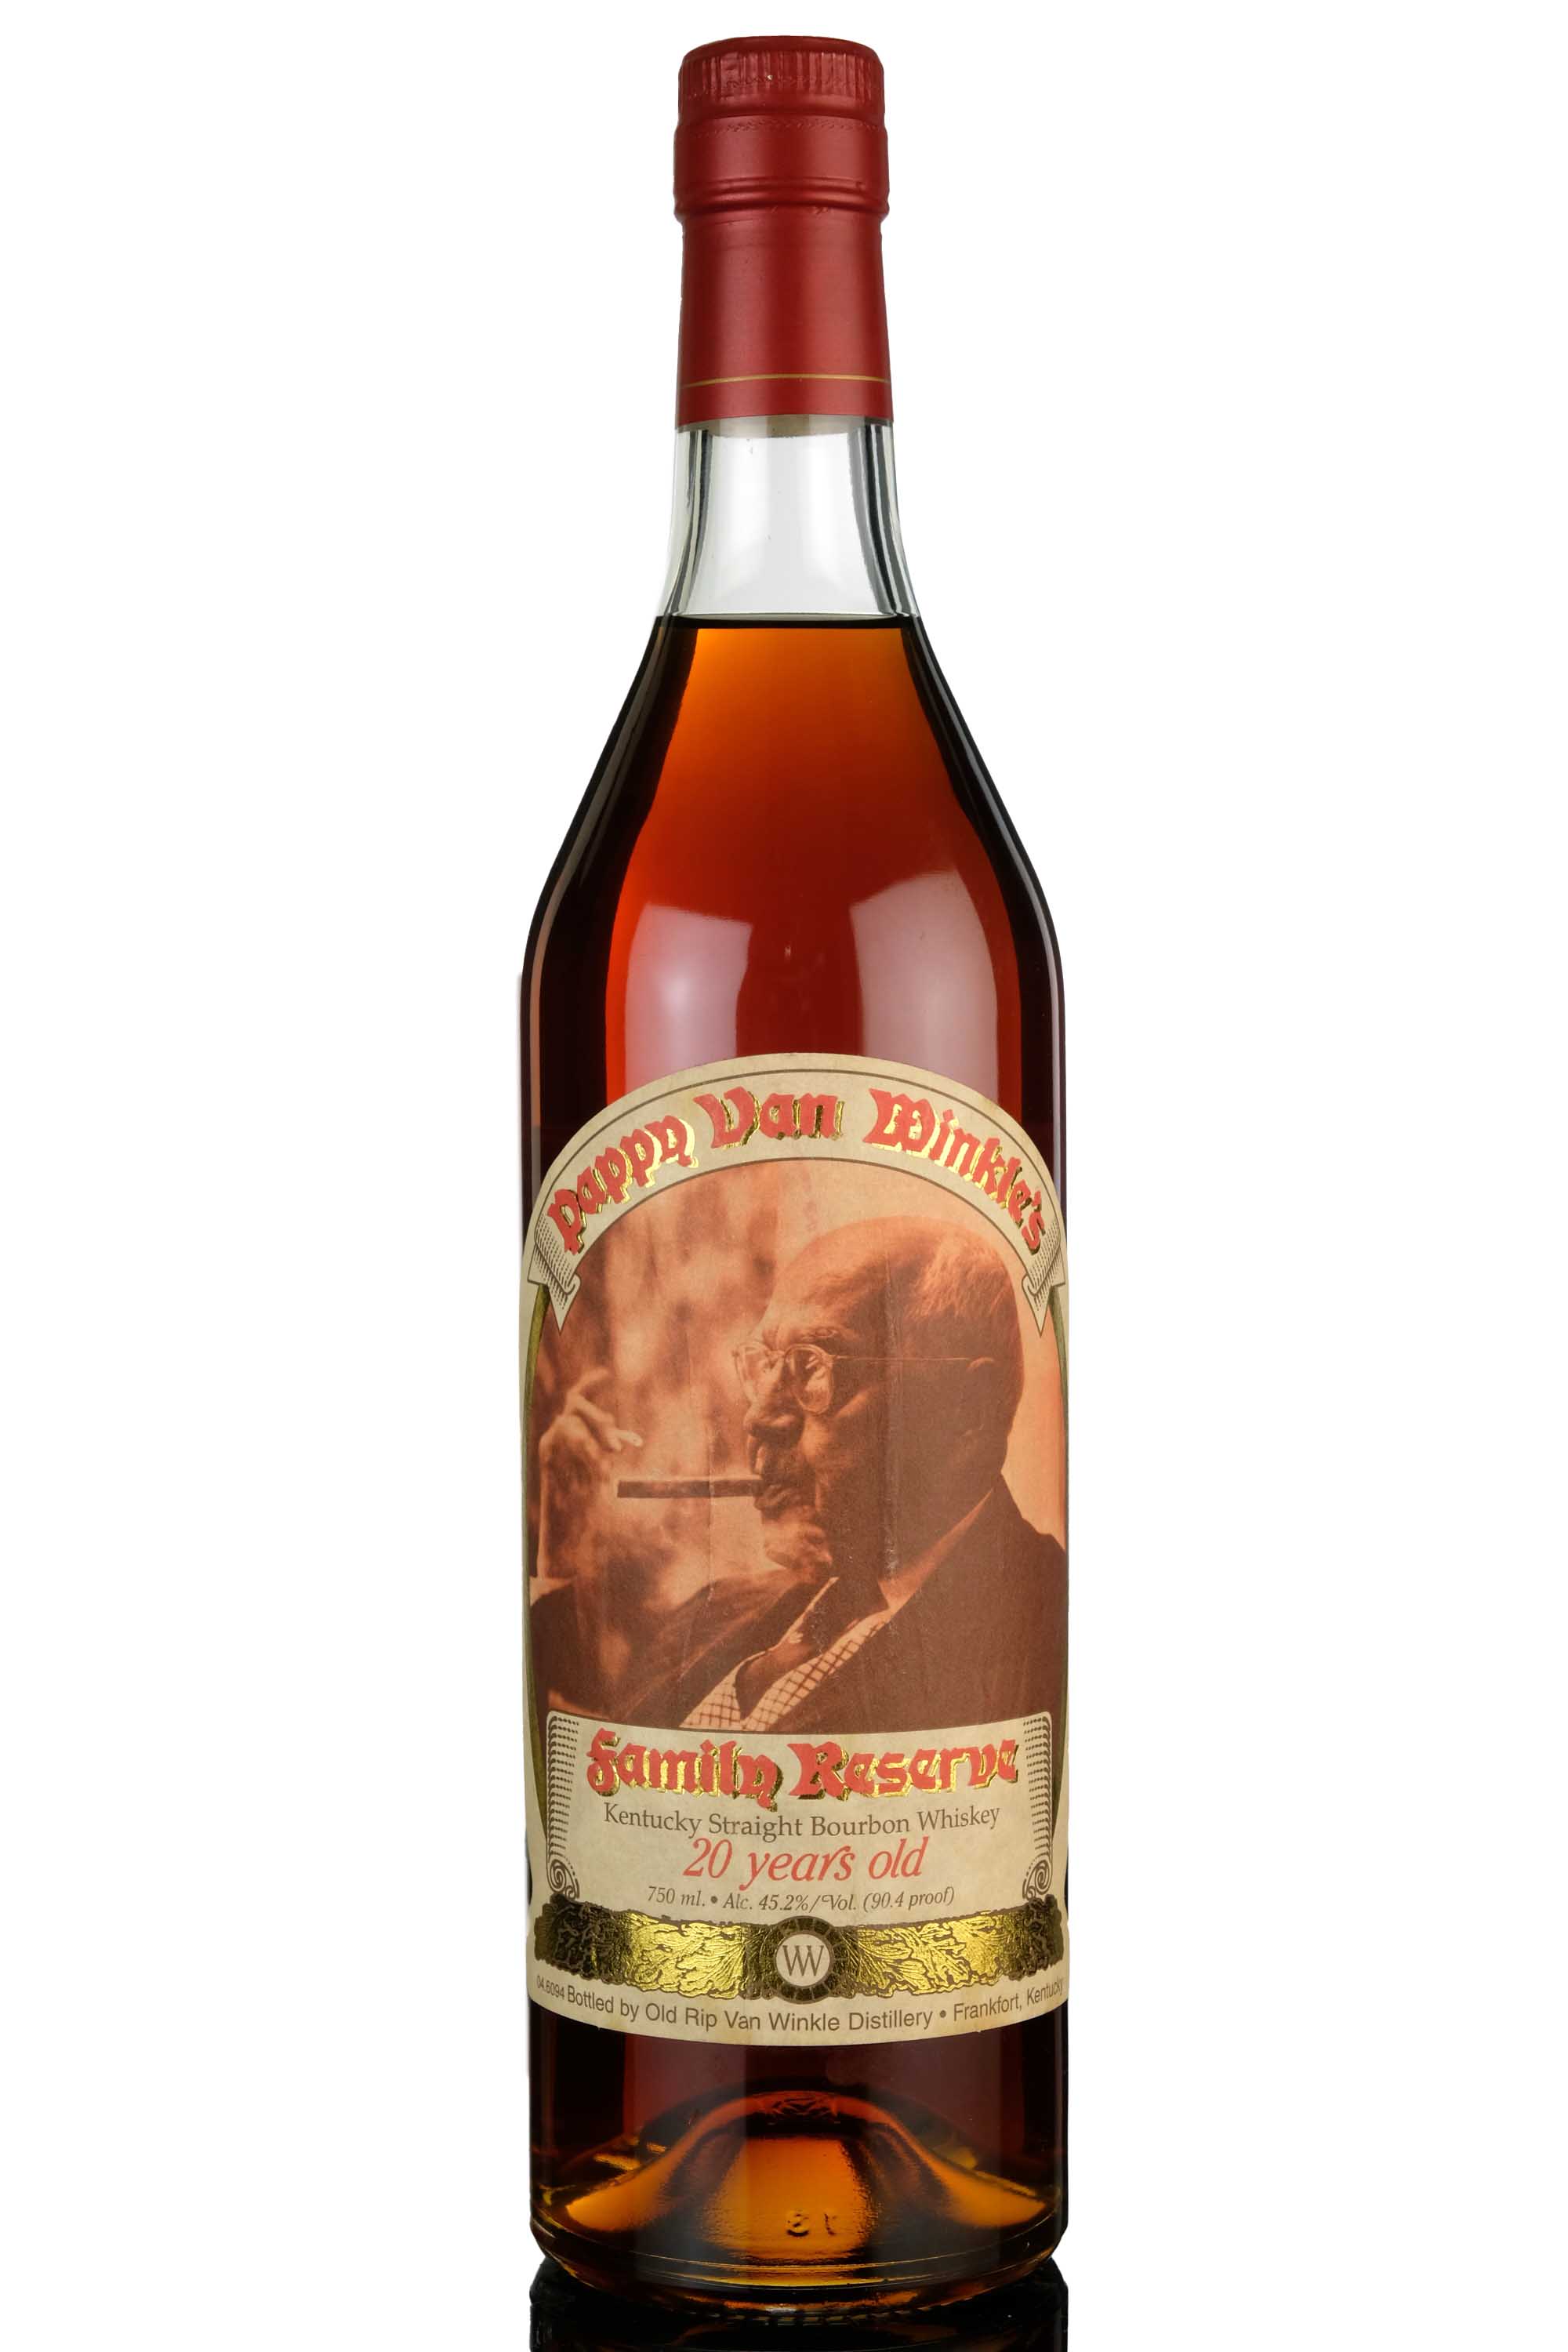 Pappy Van Winkles Family Reserve - 20 Year Old - Kentucky Straight Bourbon Whiskey - Pre 2